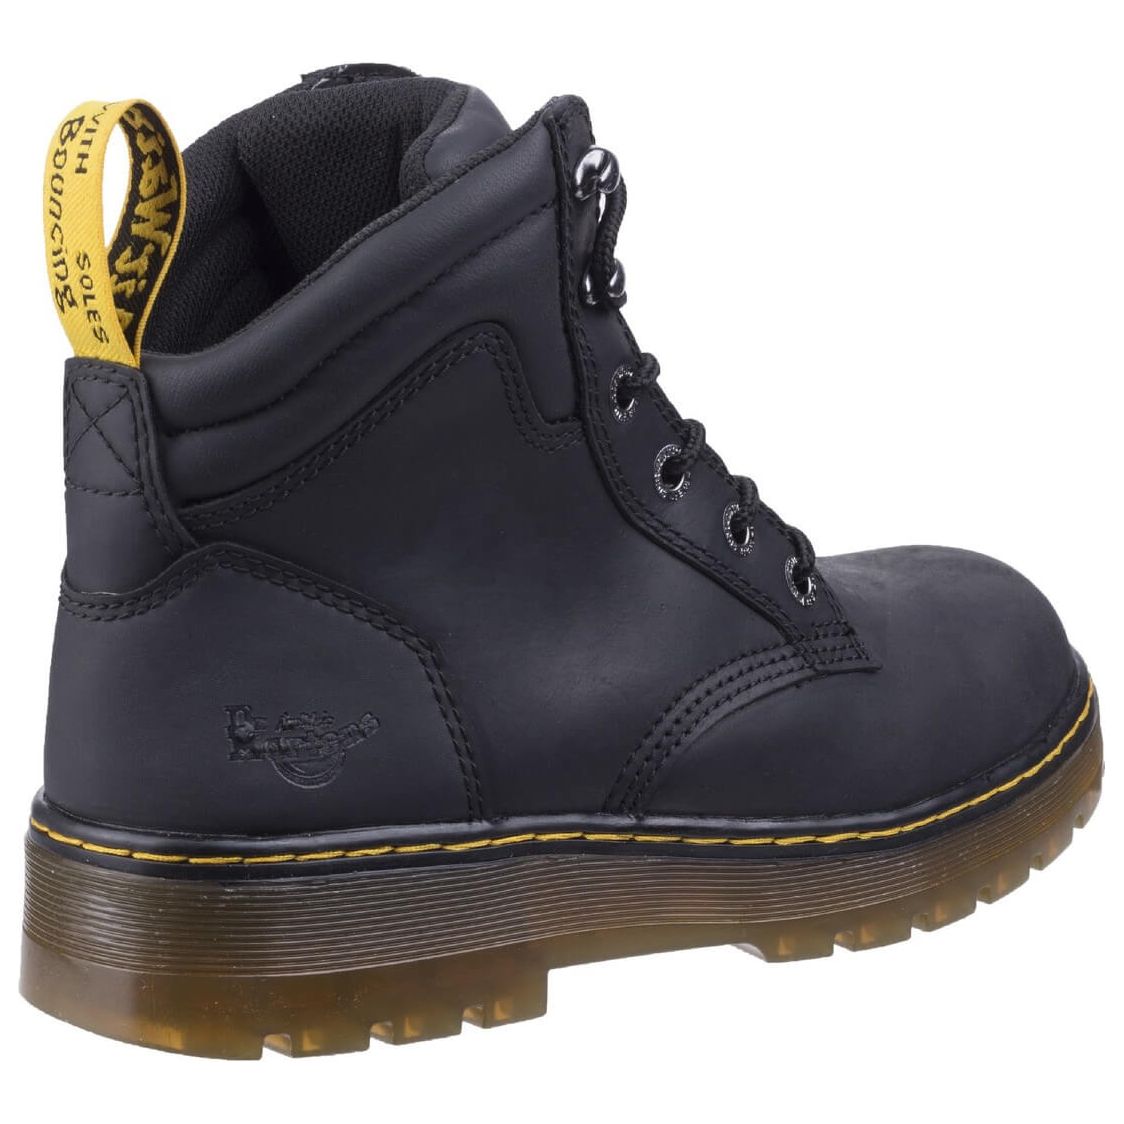 Dr Martens Brace Hiking Style Safety Boots-Black Republic-2